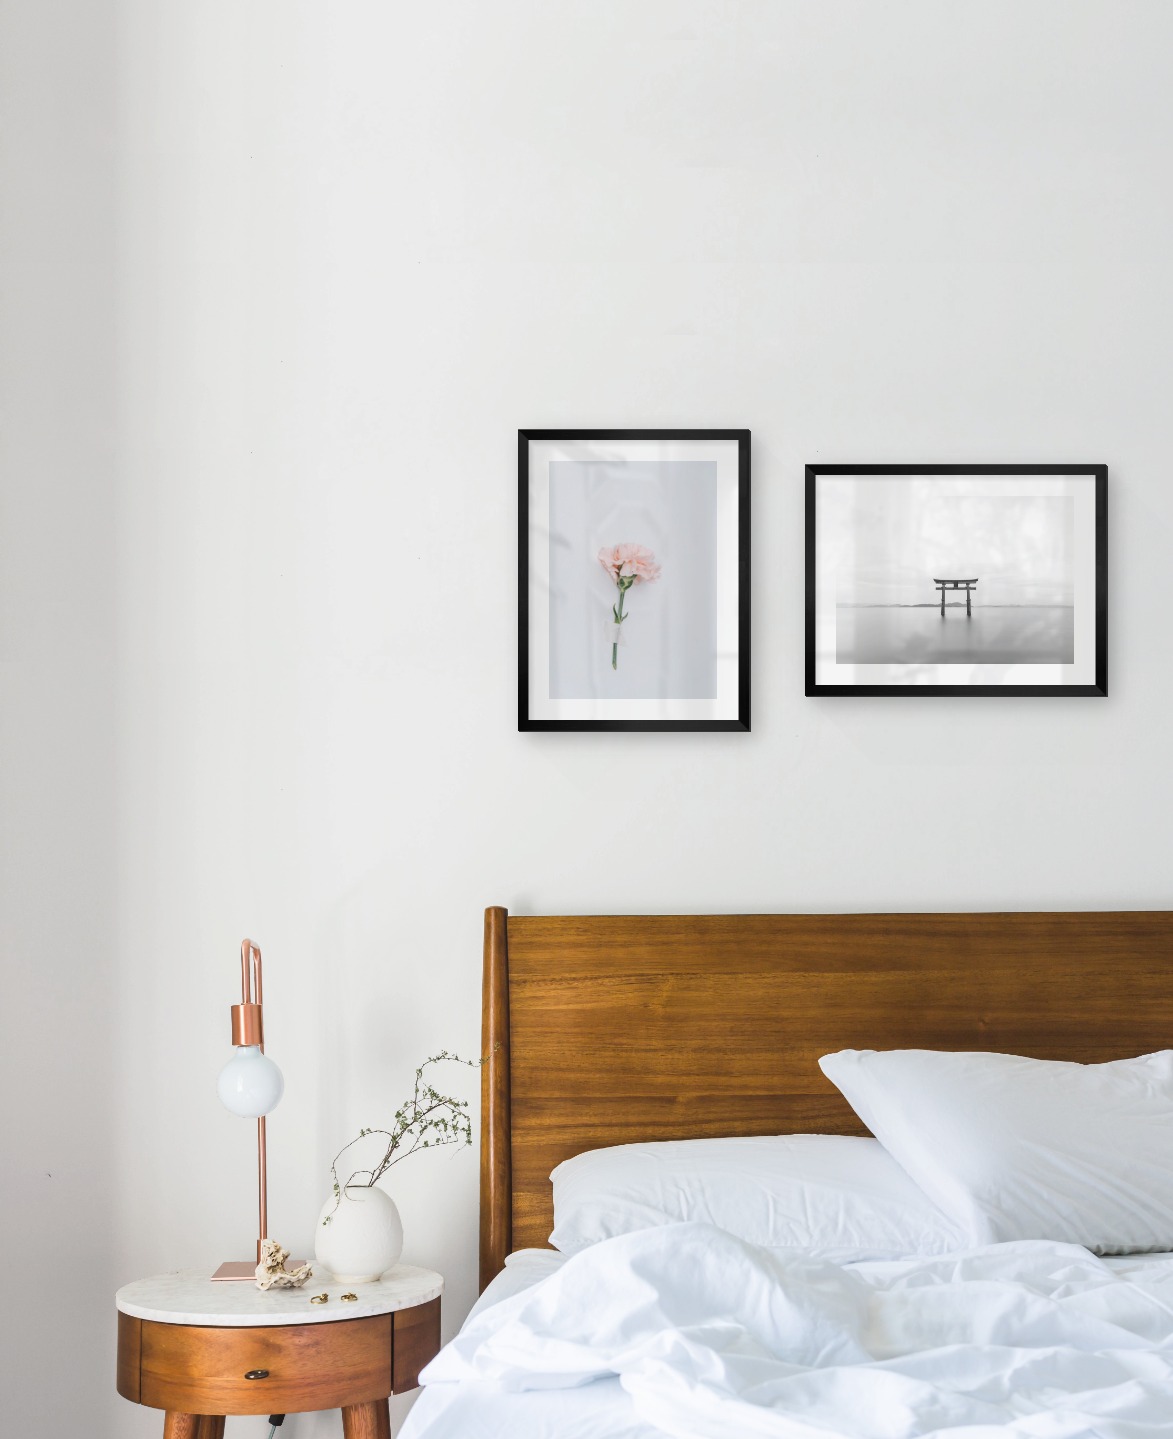 Gallery wall with picture frames in black in sizes 30x40 with prints "Pink flower" and "Pillars in the water"